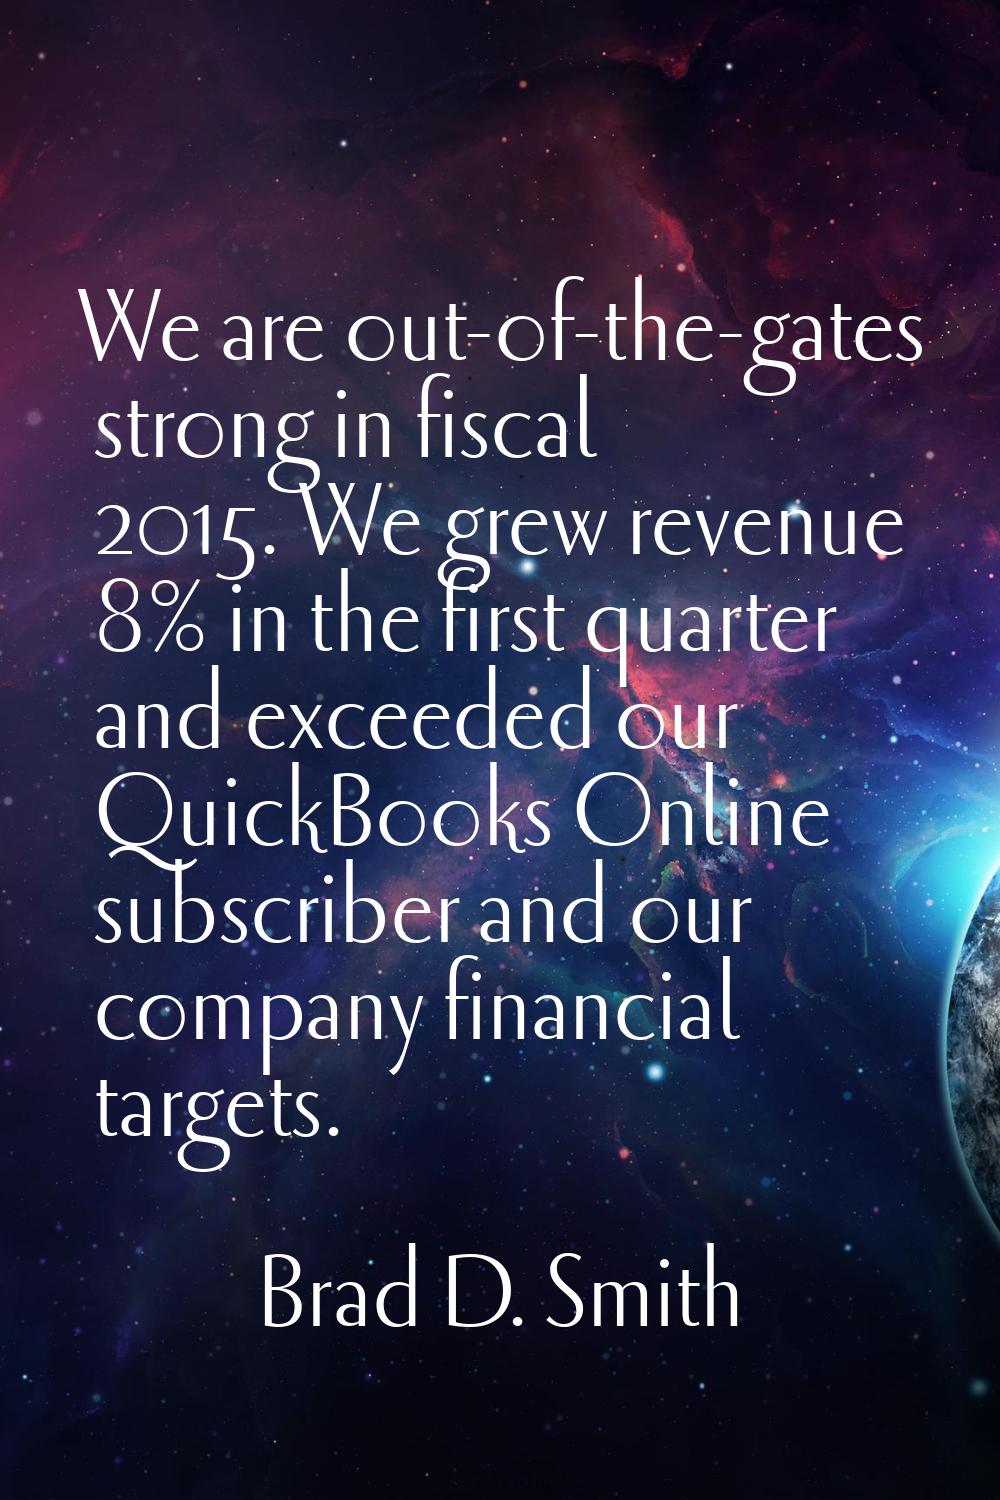 We are out-of-the-gates strong in fiscal 2015. We grew revenue 8% in the first quarter and exceeded